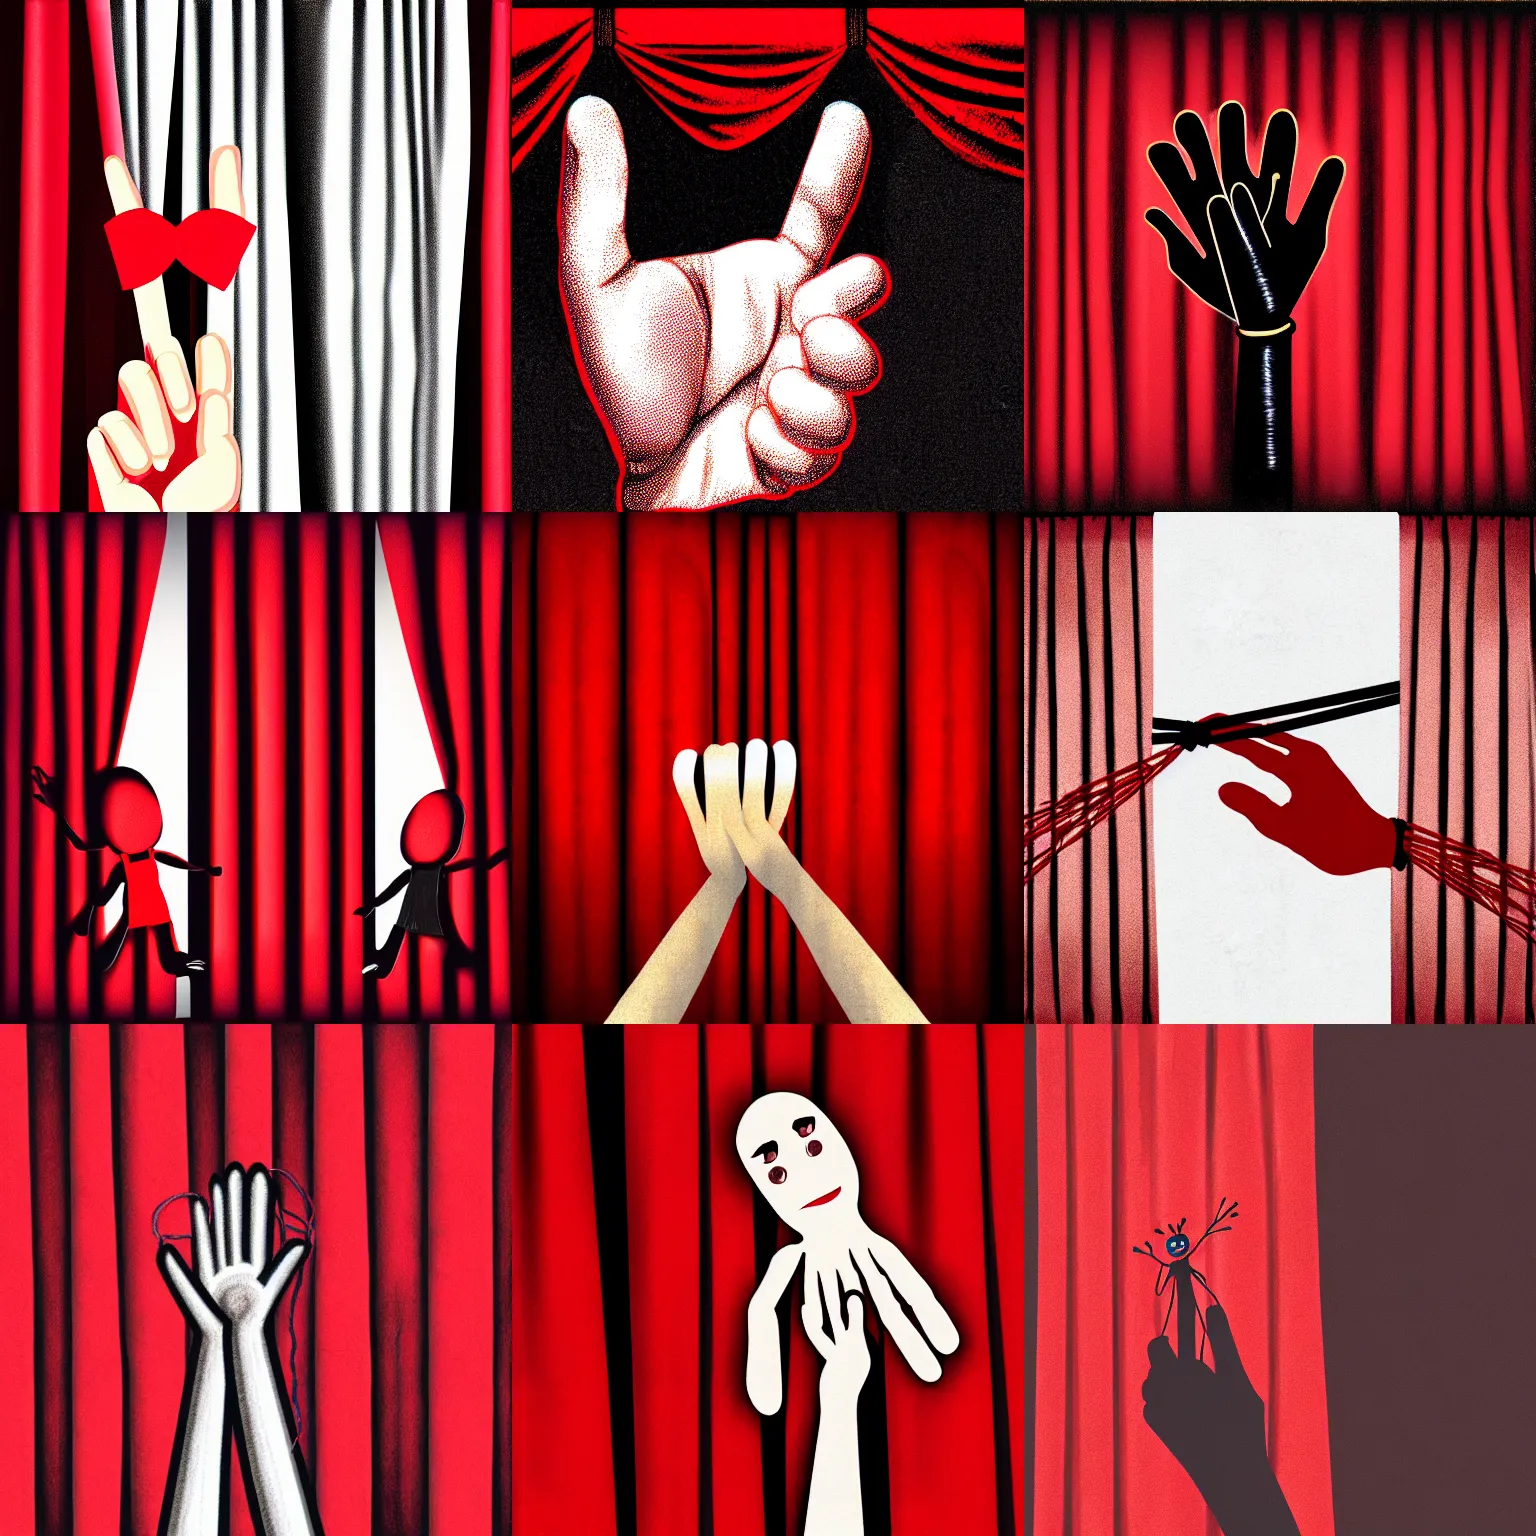 Prompt: Illustration of a hand holding strings puppet behind red curtains, details visible, highly detailed, very dark ambiance, album cover